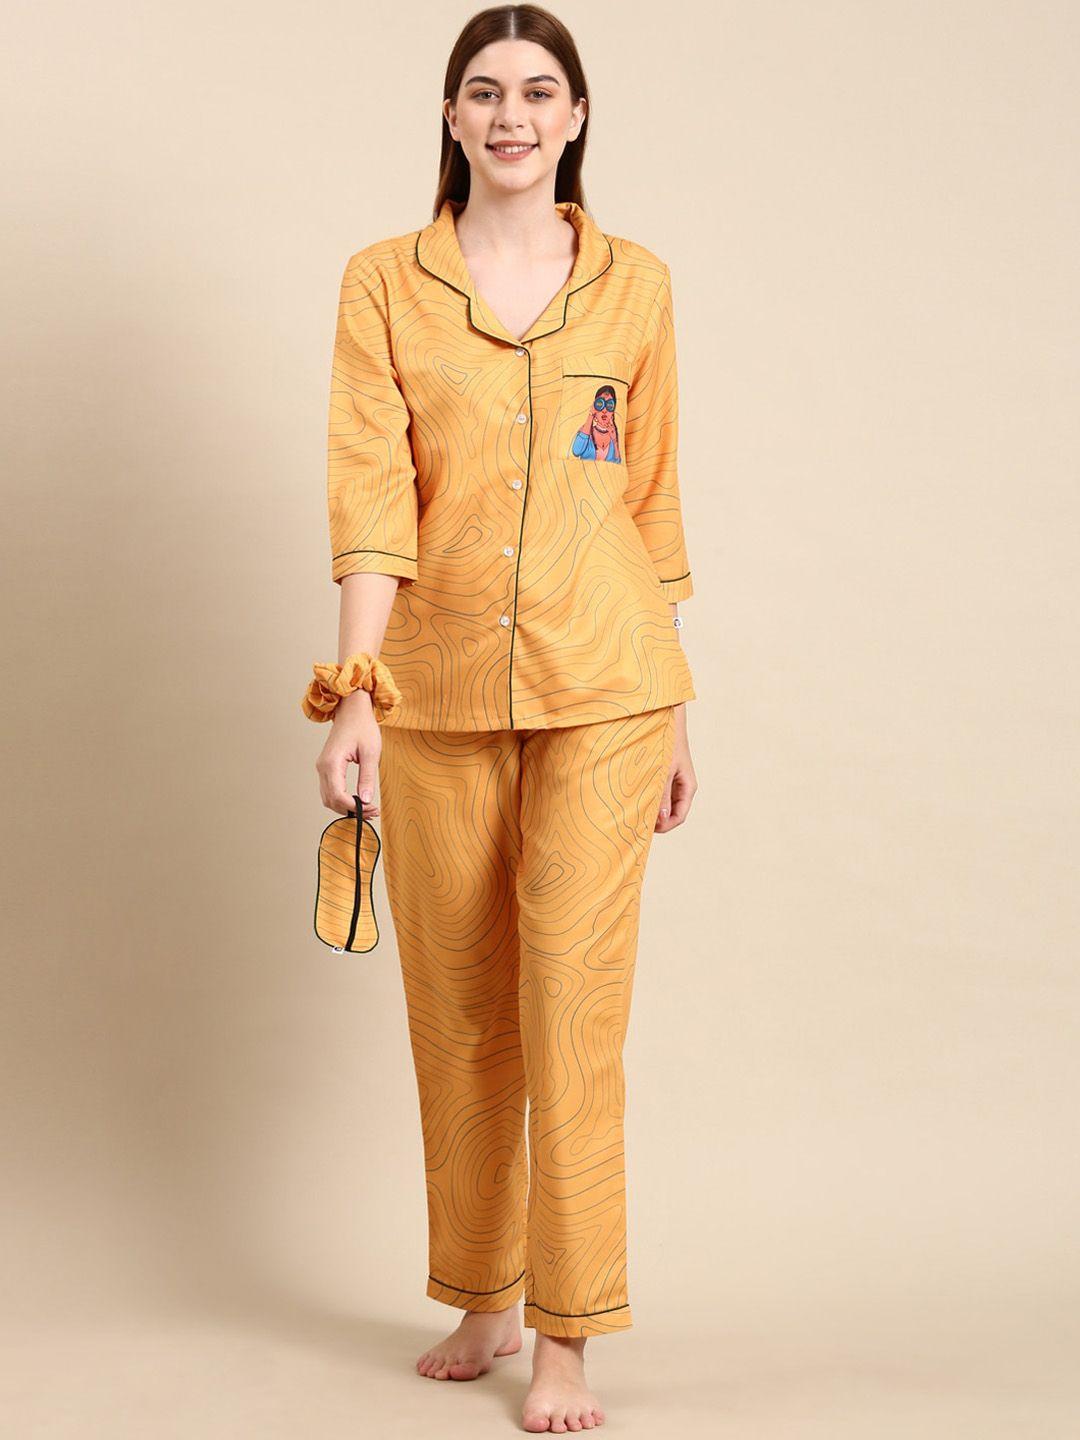 bannos-swagger-yellow-&-blue-abstract-printed-night-suit